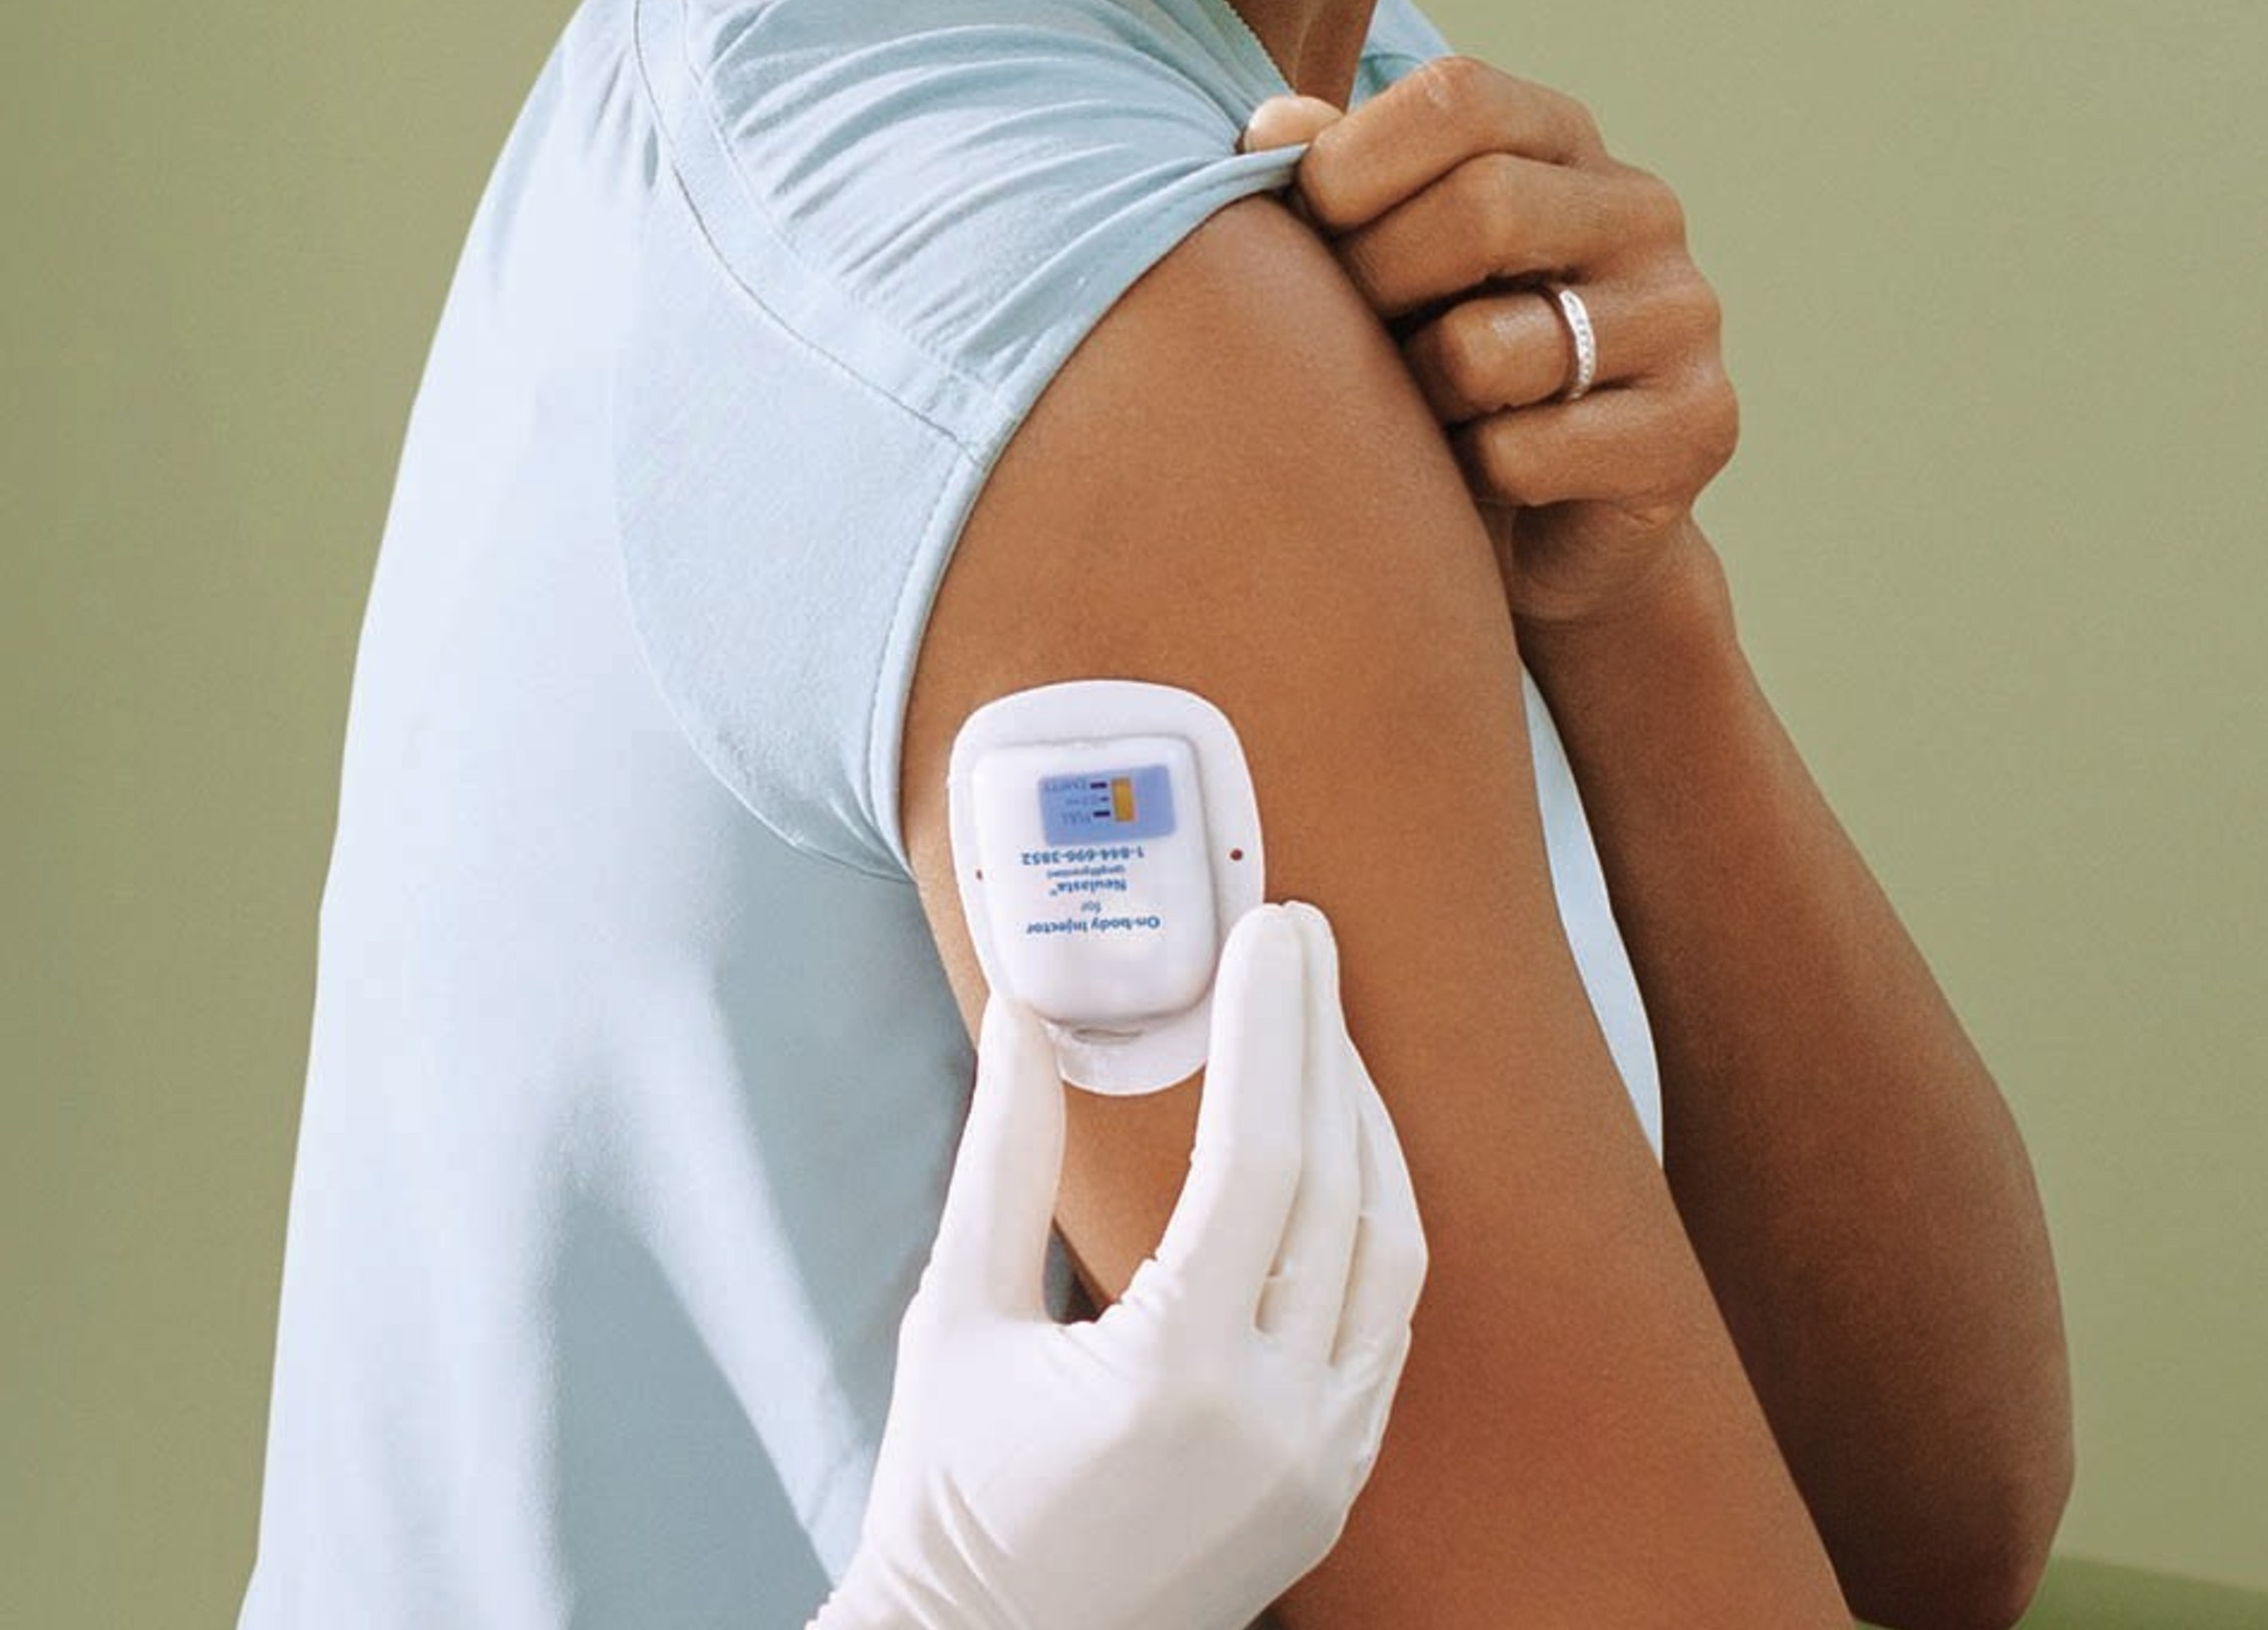 Wearable Injectors Market To Grow Steadily With An Impressive CAGR Of 12.4% During The Forecast Period From 2022 To 2032: Market.us